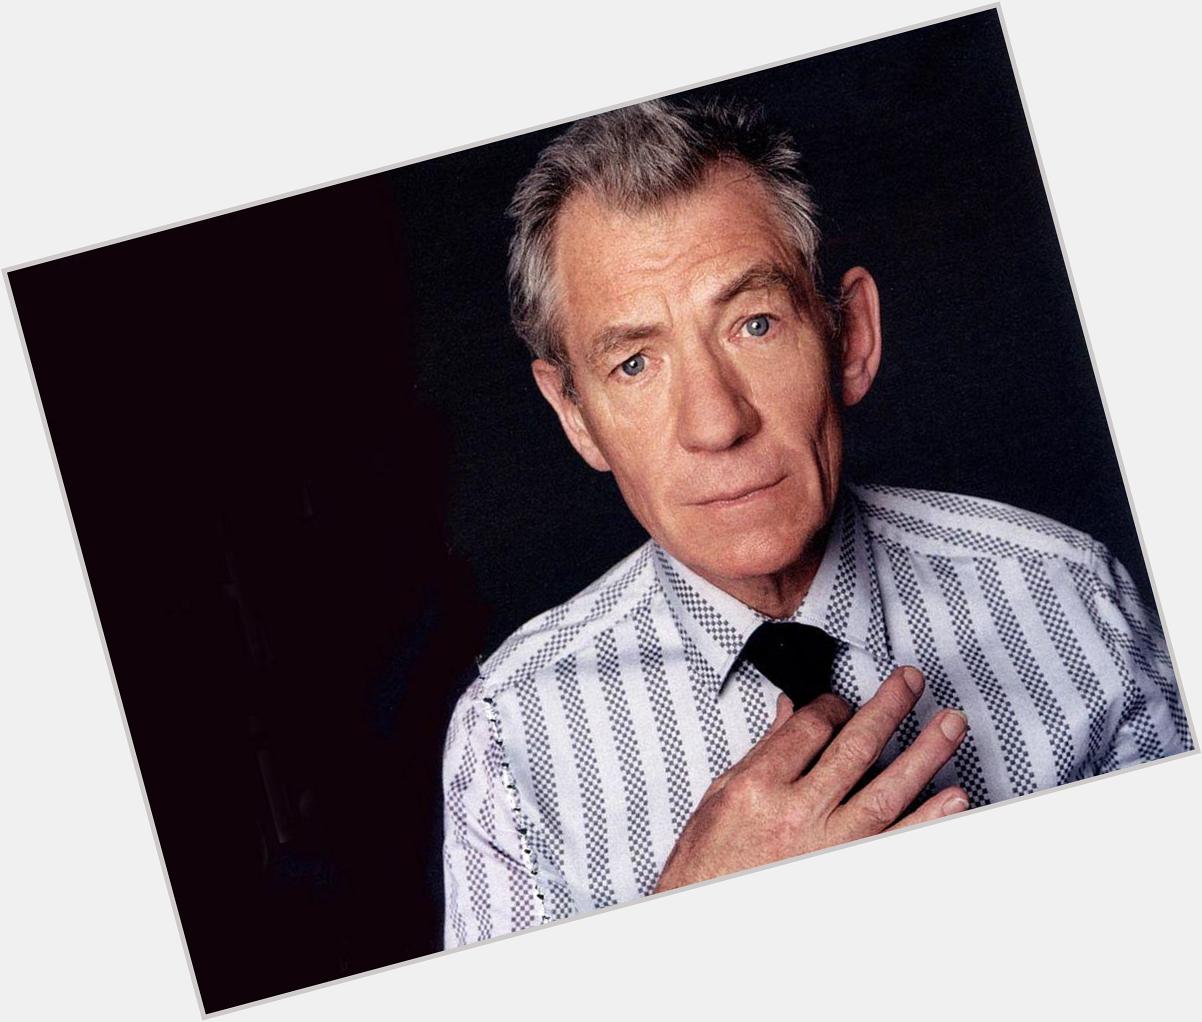 Happy birthday, Sir Ian McKellen! Find materials by and about Sir Ian in our catalogue:  